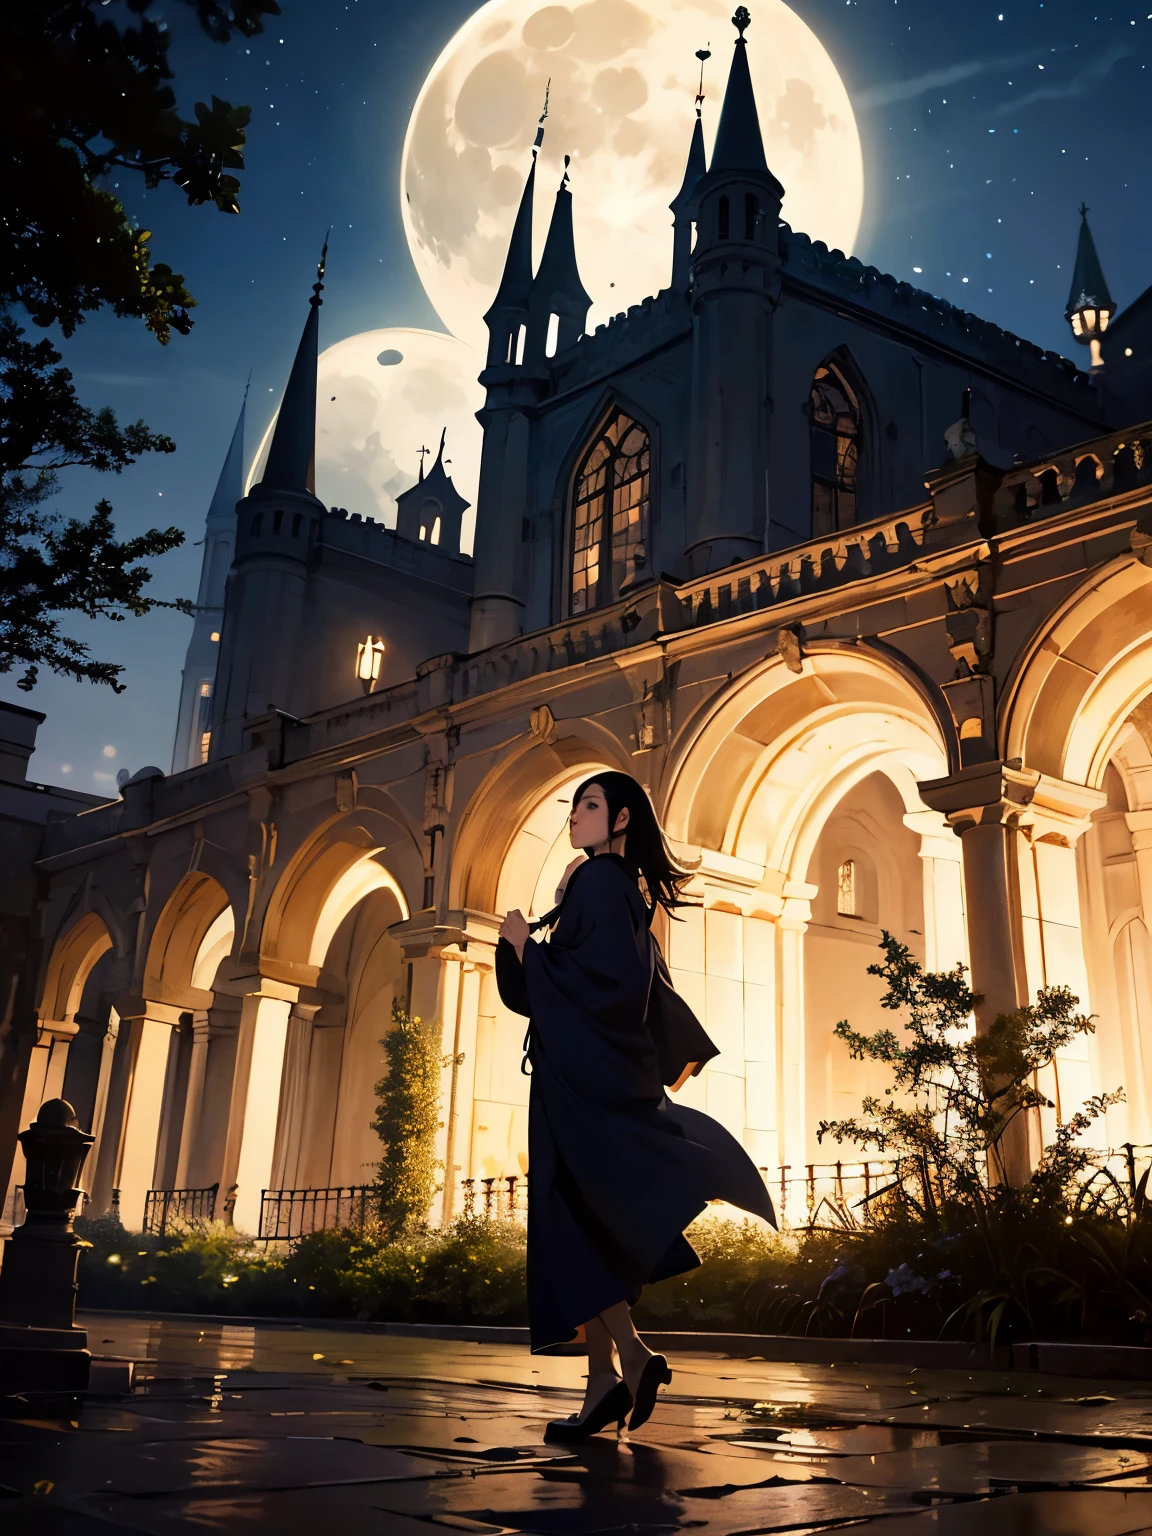 (A girl with black hair walks in the courtyard of a castle on a full moon night), (best quality, 4k, highres, masterpiece:1.2), ultra-detailed, (realistic, photorealistic:1.37), HDR, (crimson, deep blue) color palette, (soft, gentle) lighting, (oil painting, dreamlike) medium, detailed moonlight reflections on the cobblestone ground, intricate architectural details of the castle walls, (flowing, ethereal) gown swaying in the breeze, (mysterious, enchanting) atmosphere, (subtle, delicate) shadows cast by the moon, (whispering, rustling) leaves of ancient trees, (silhouetted, towering) spires reaching towards the night sky, sparkling stars illuminating the scene, muted sounds of the night punctuated by occasional hoots of an owl.